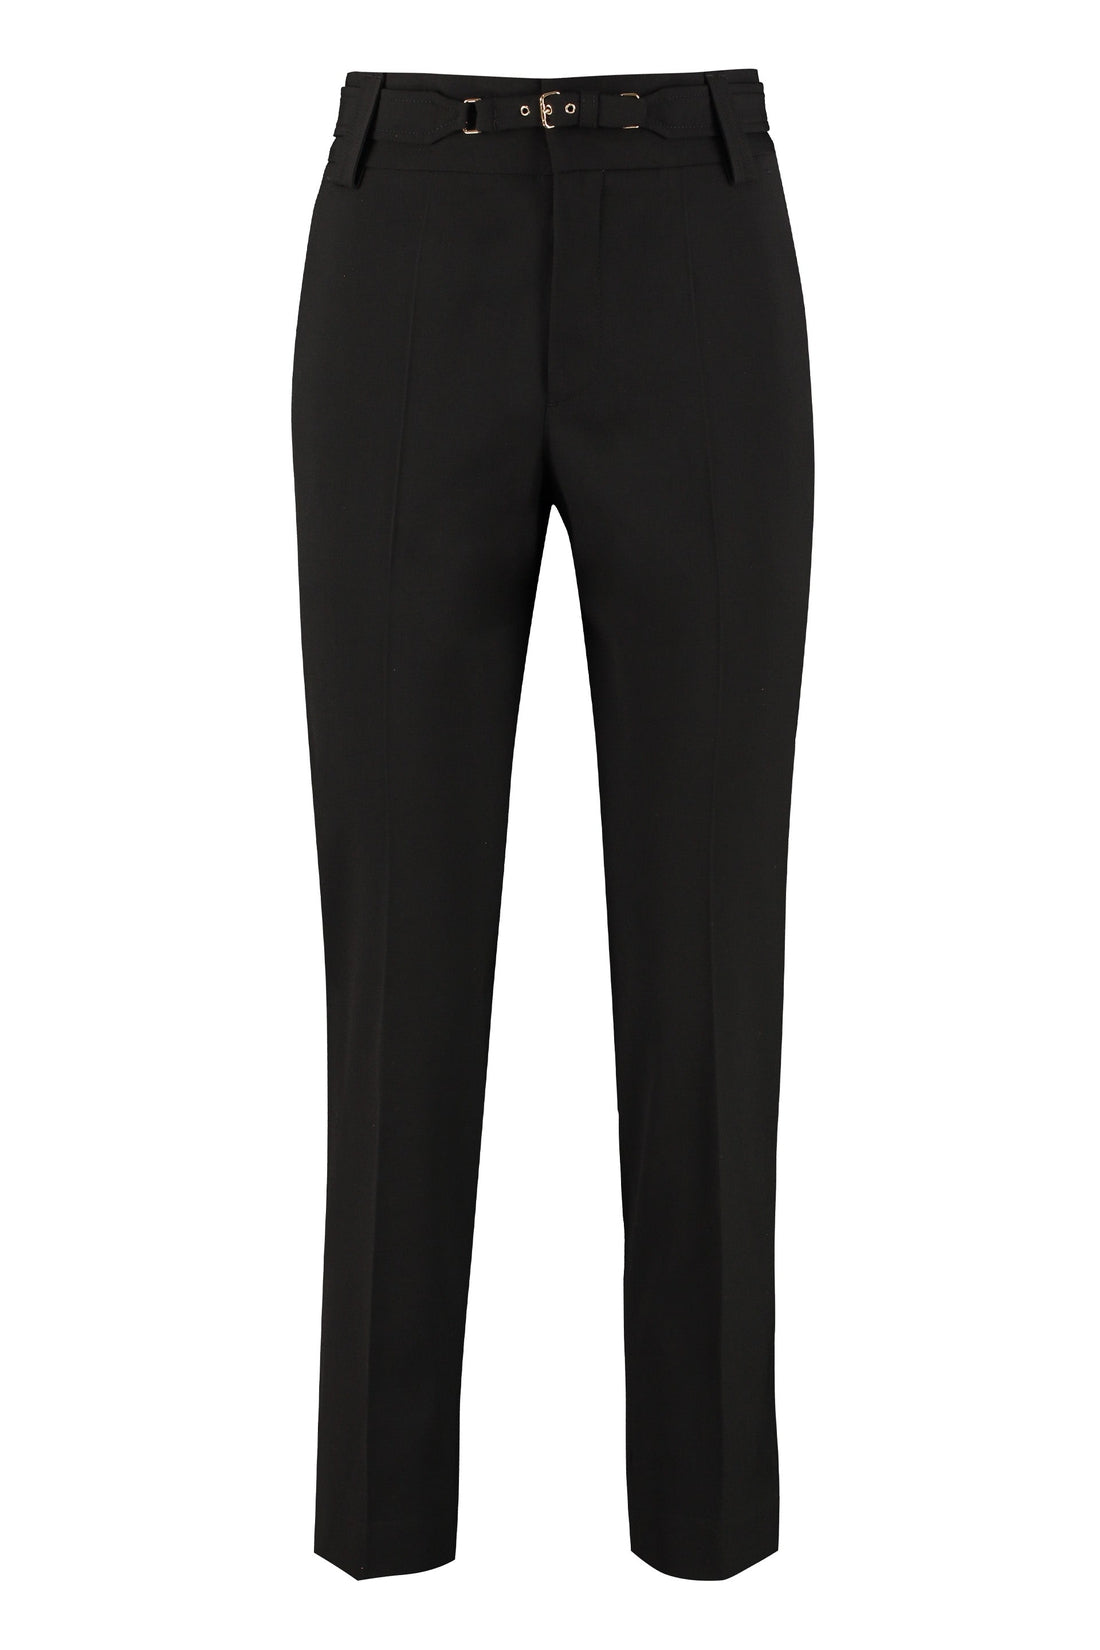 RED VALENTINO-OUTLET-SALE-Virgin wool tailored trousers-ARCHIVIST